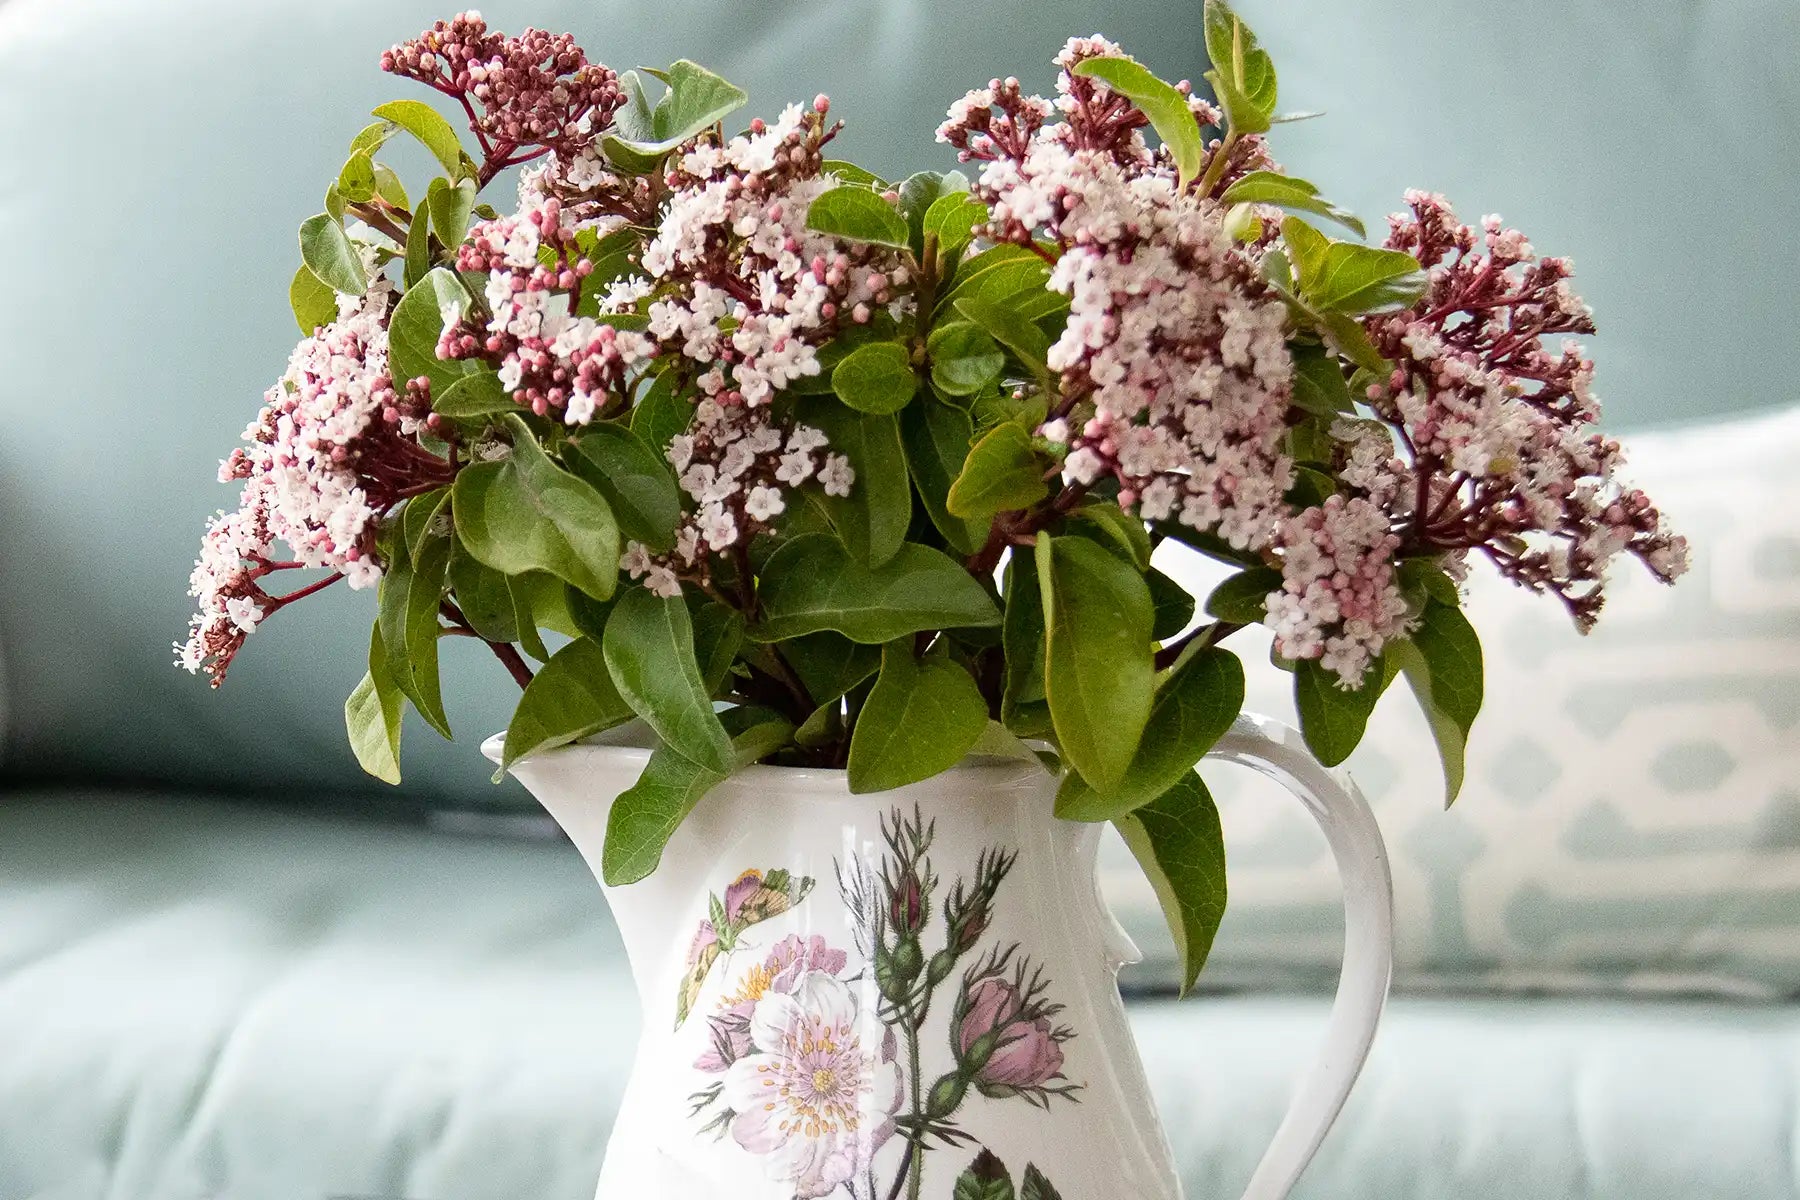 Bunches of small pink blooms of the Shades of Pink® Viburnum plant are casulally placed in a white vintage pitcher with a flower design that mimics the viburnum plant's coloration. This welcoming cottage-style vessel sits near an aqua livingroom sofa.